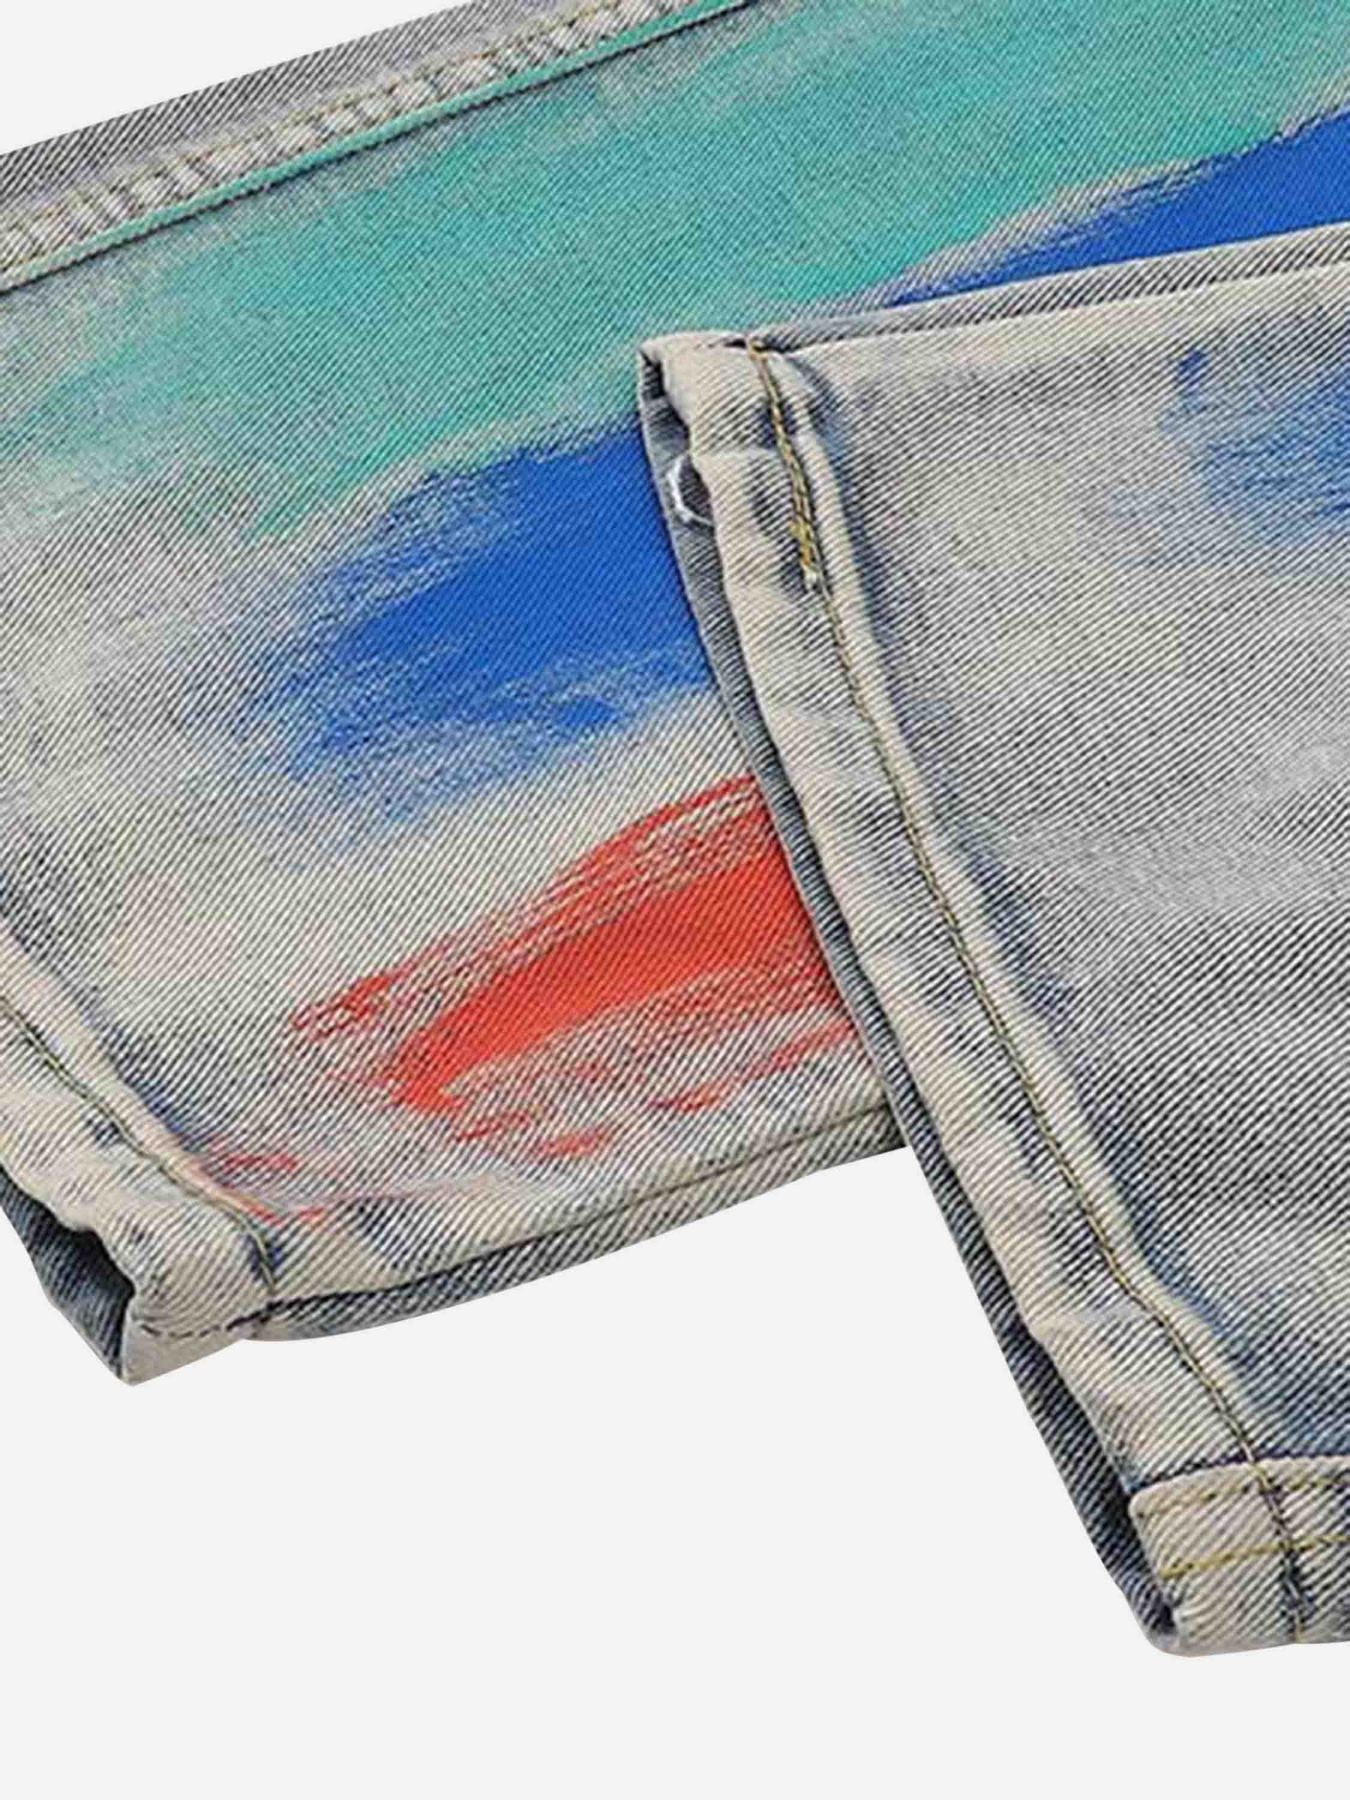 The Supermade Vintage Ink Wash Ripped Jeans